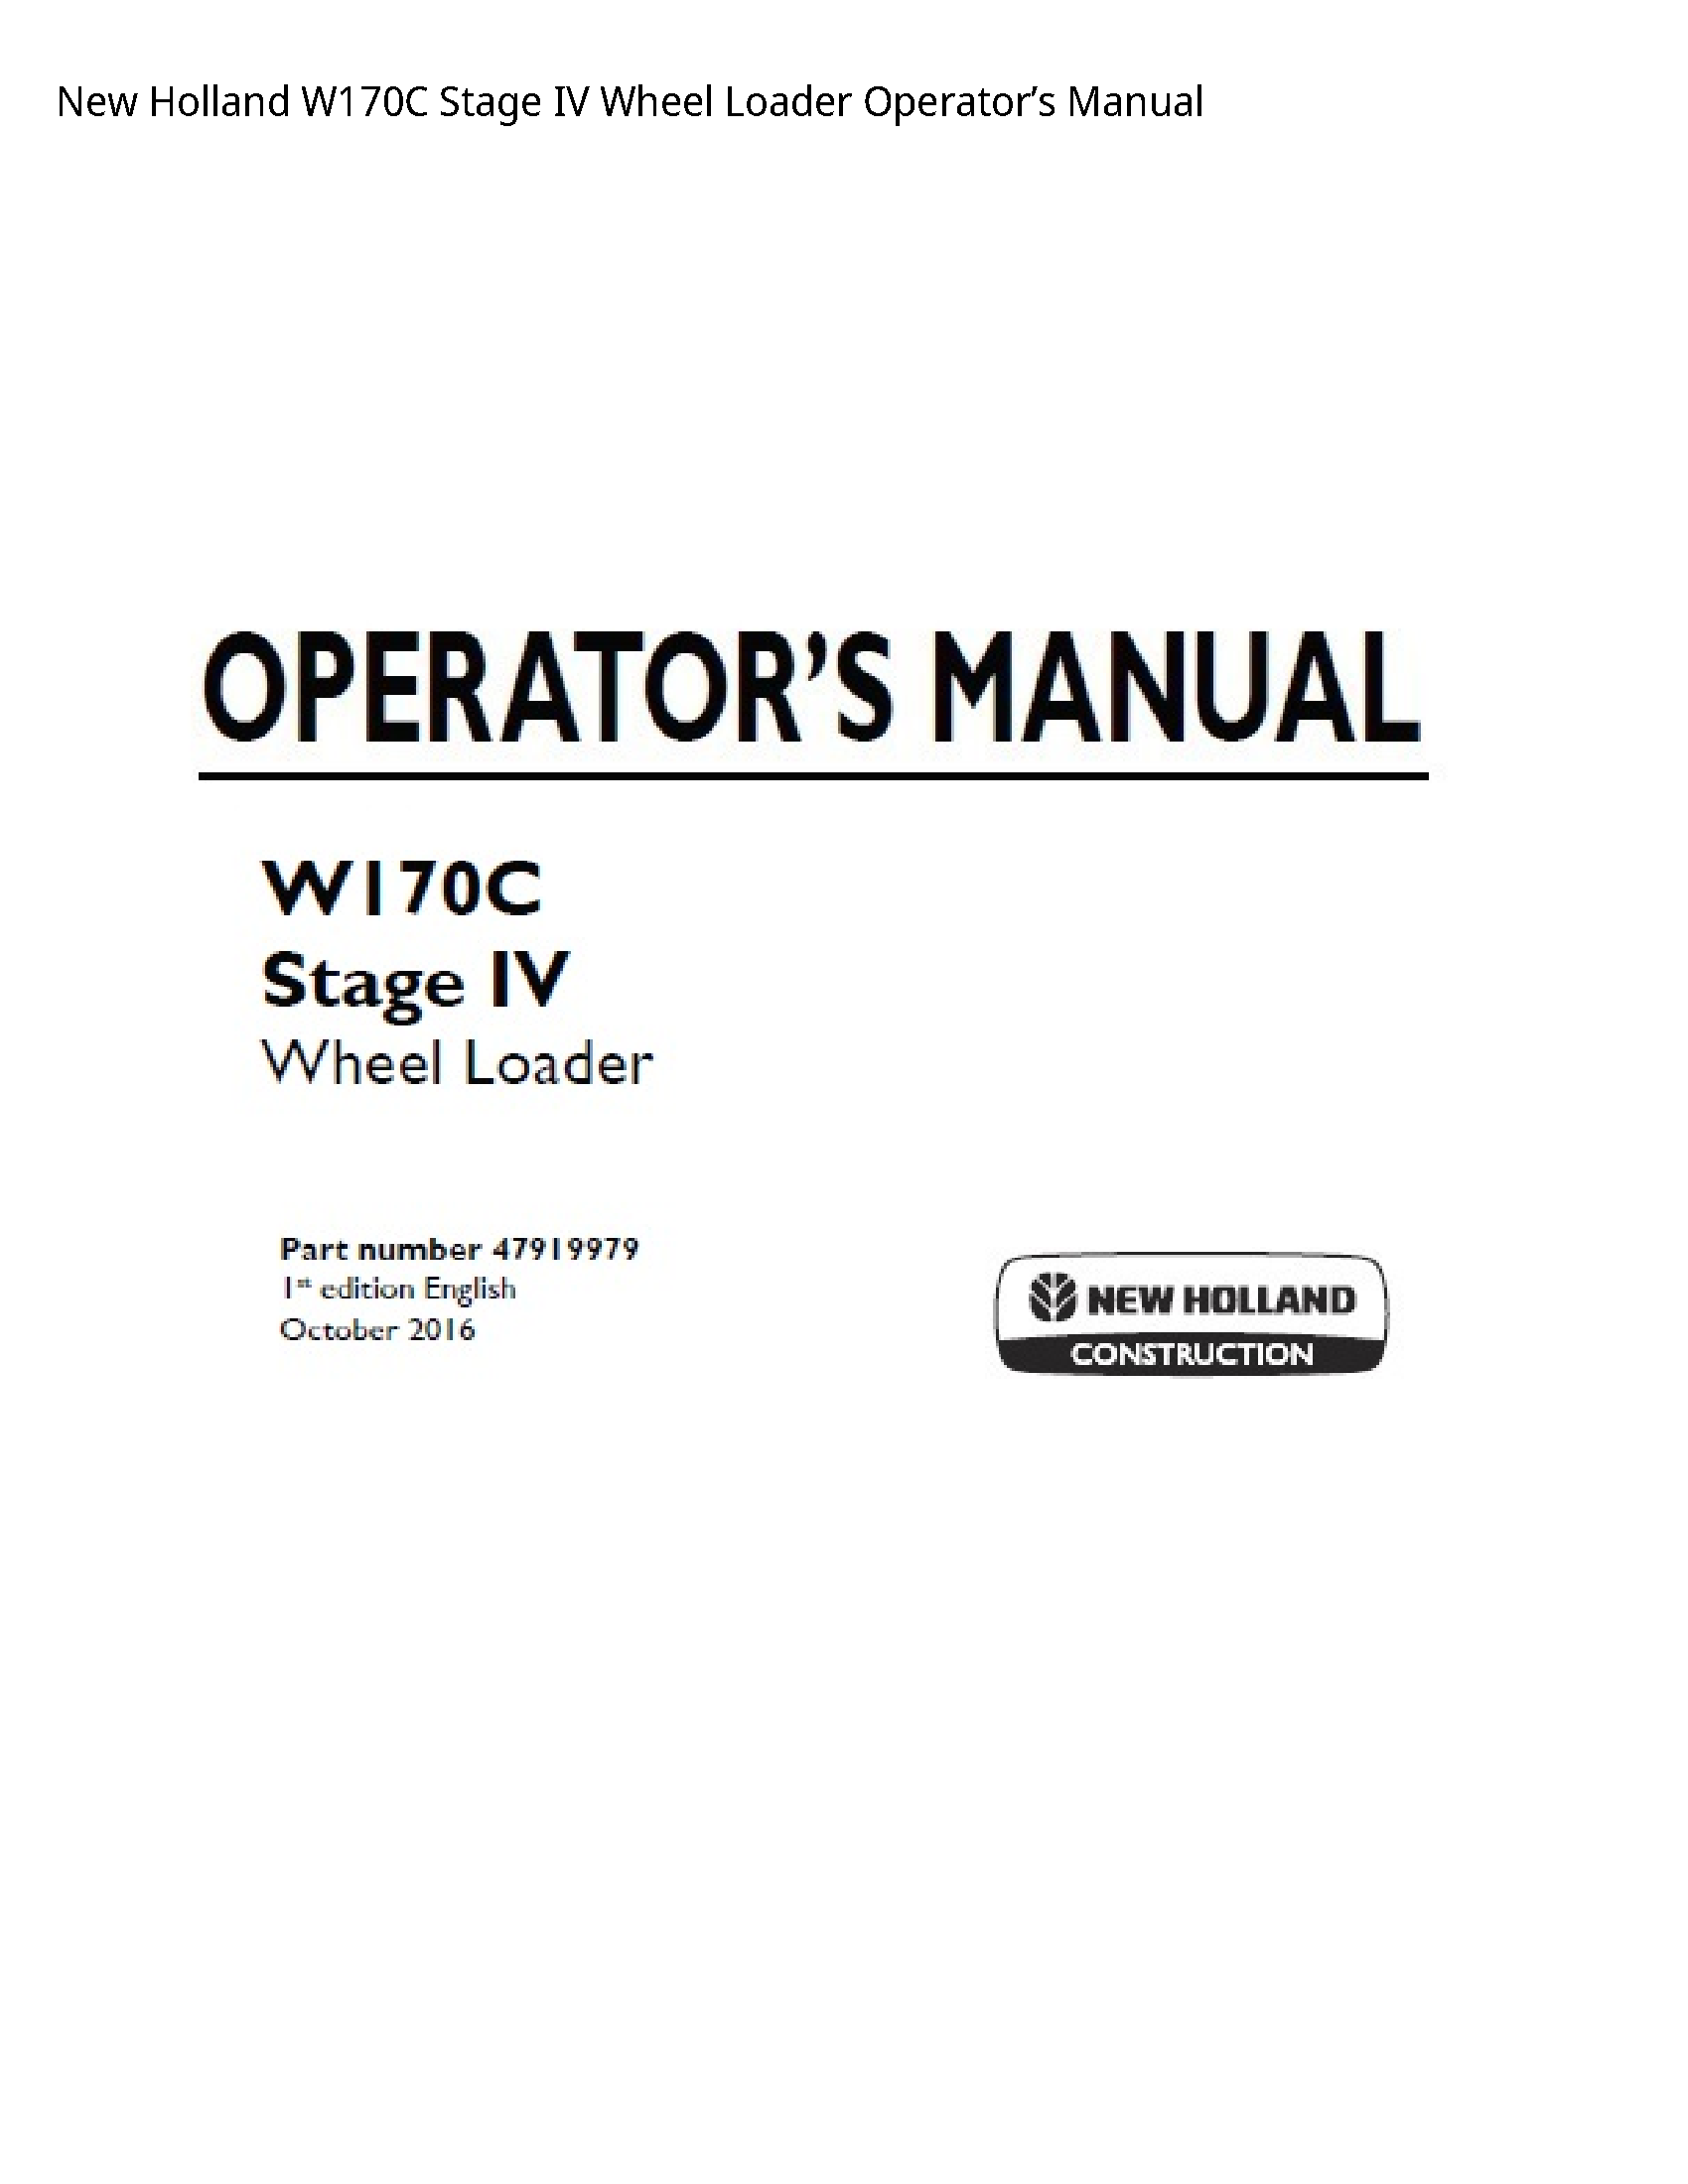 New Holland W170C Stage IV Wheel Loader Operator’s manual